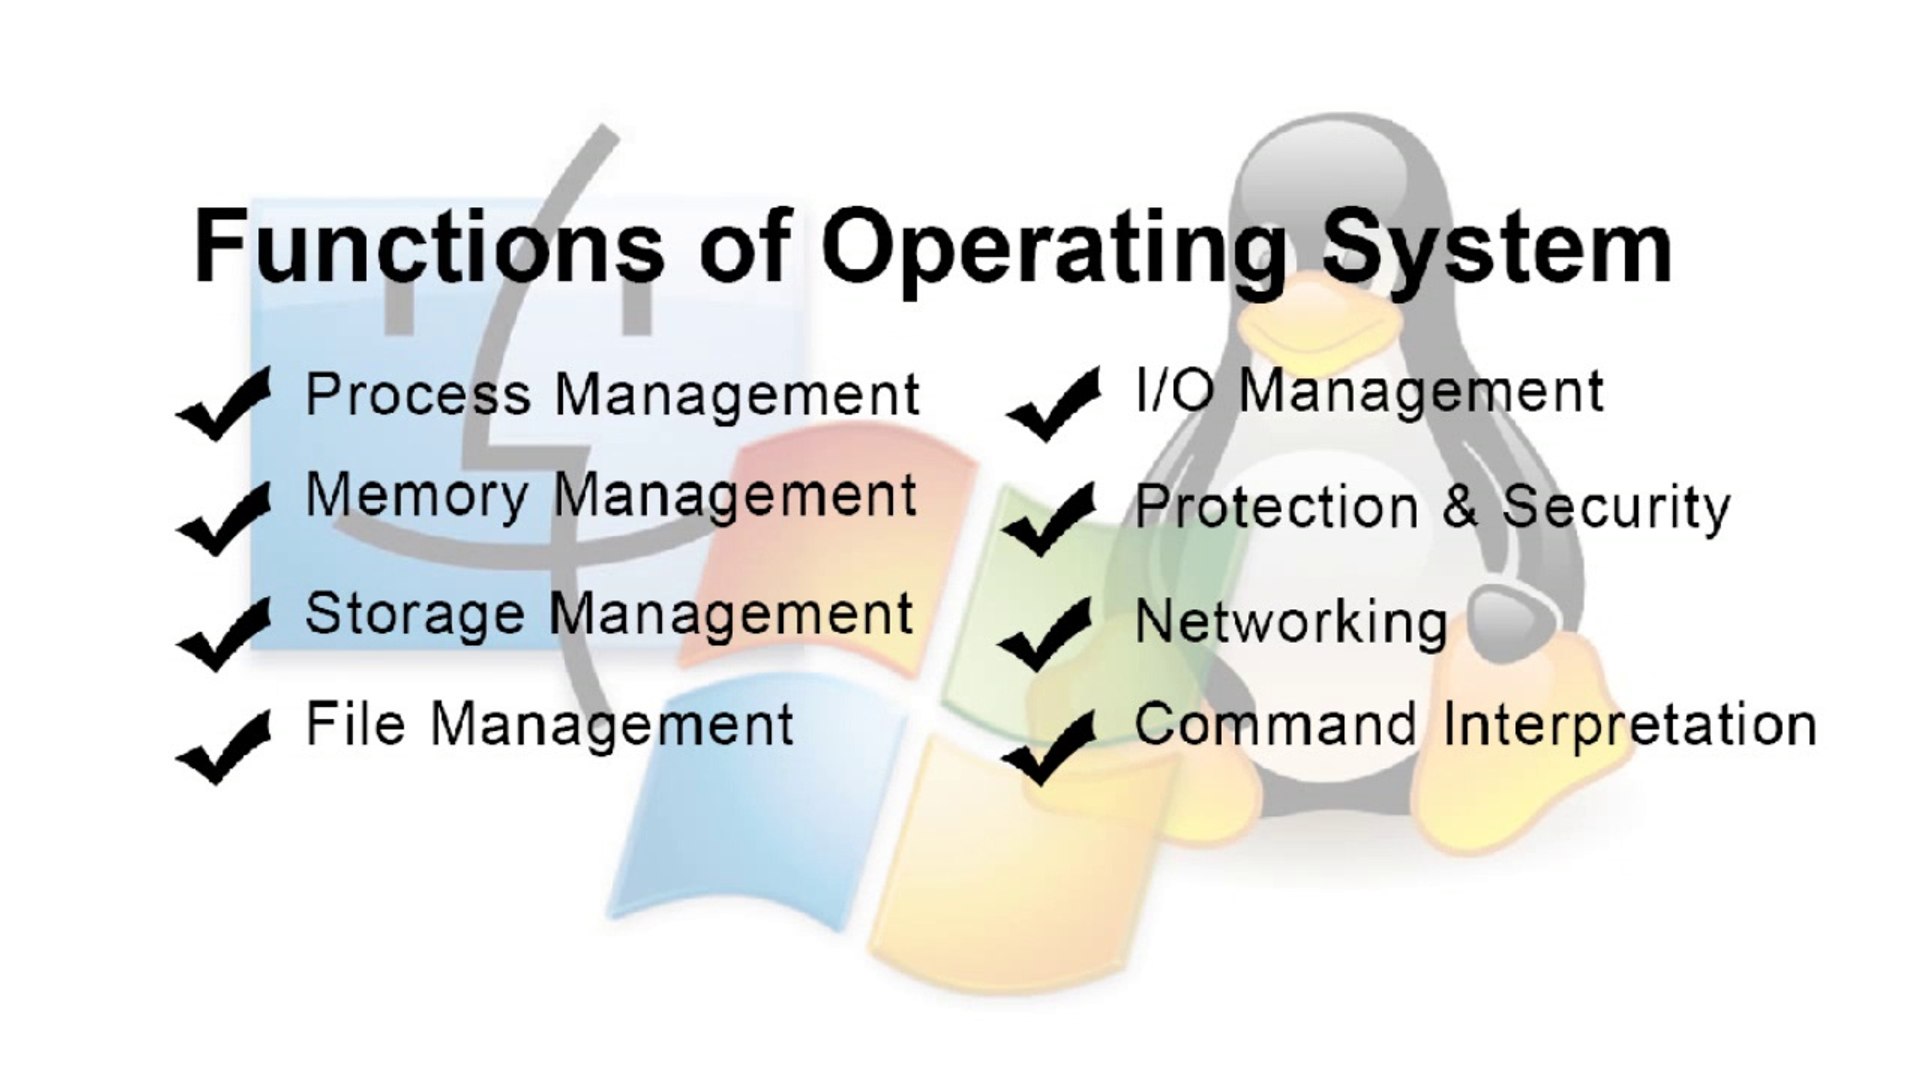 Basic Function of Operating System - MarcobilKnight